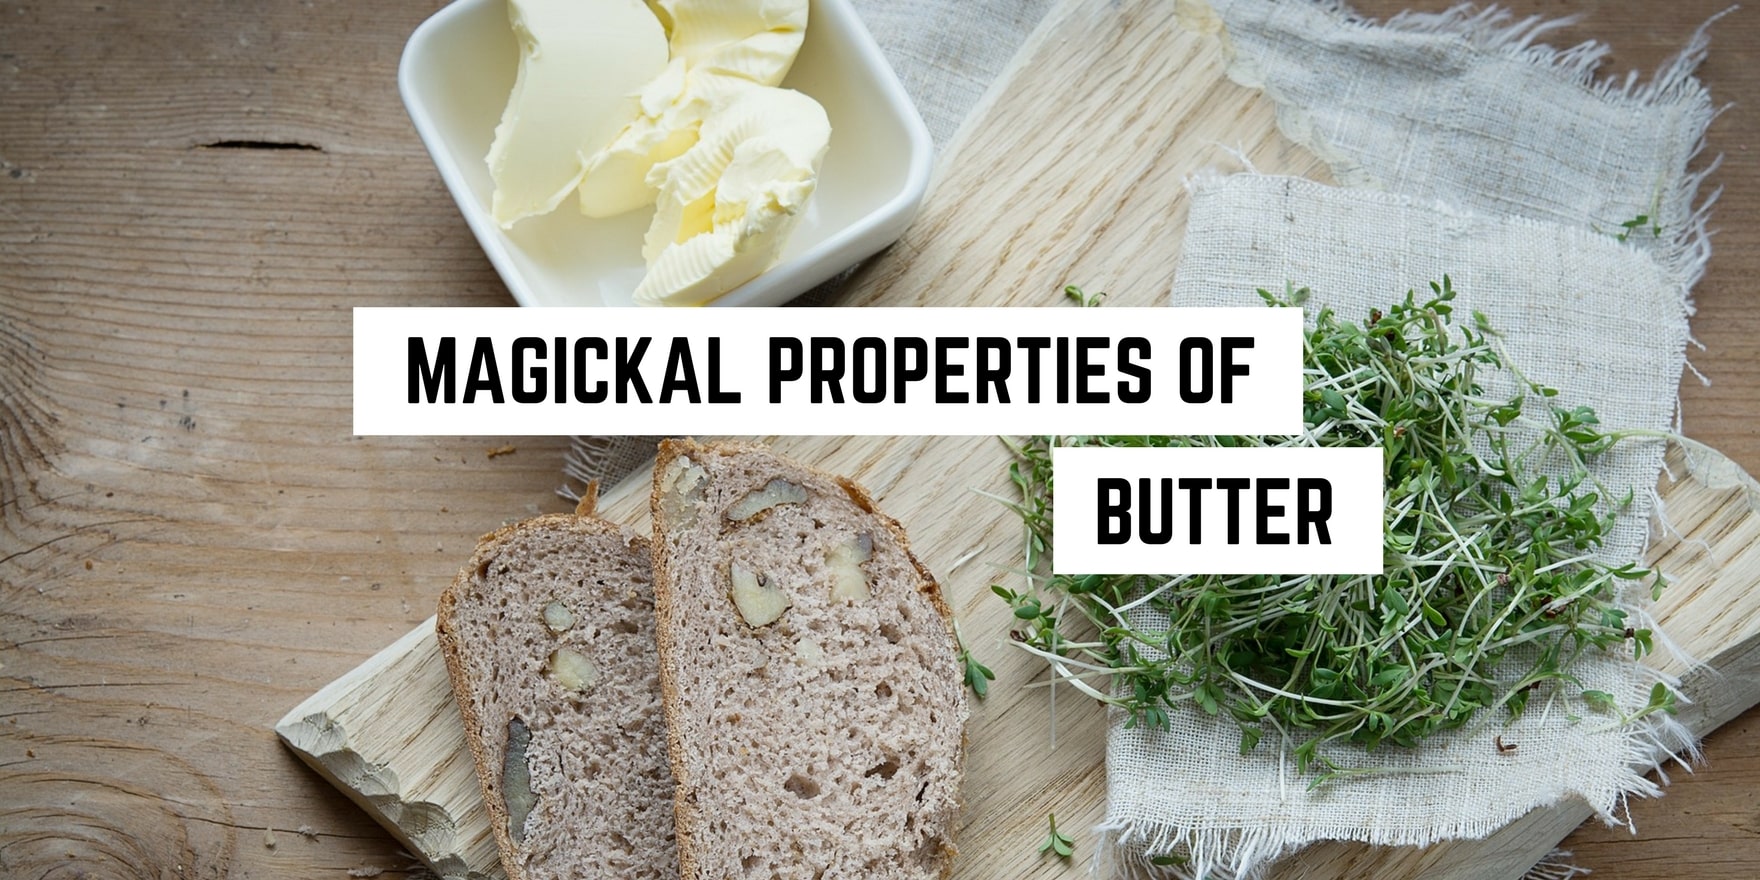 A rustic setting showcasing wholesome ingredients, with a whimsical take on culinary essentials: the metaphysical properties of butter.